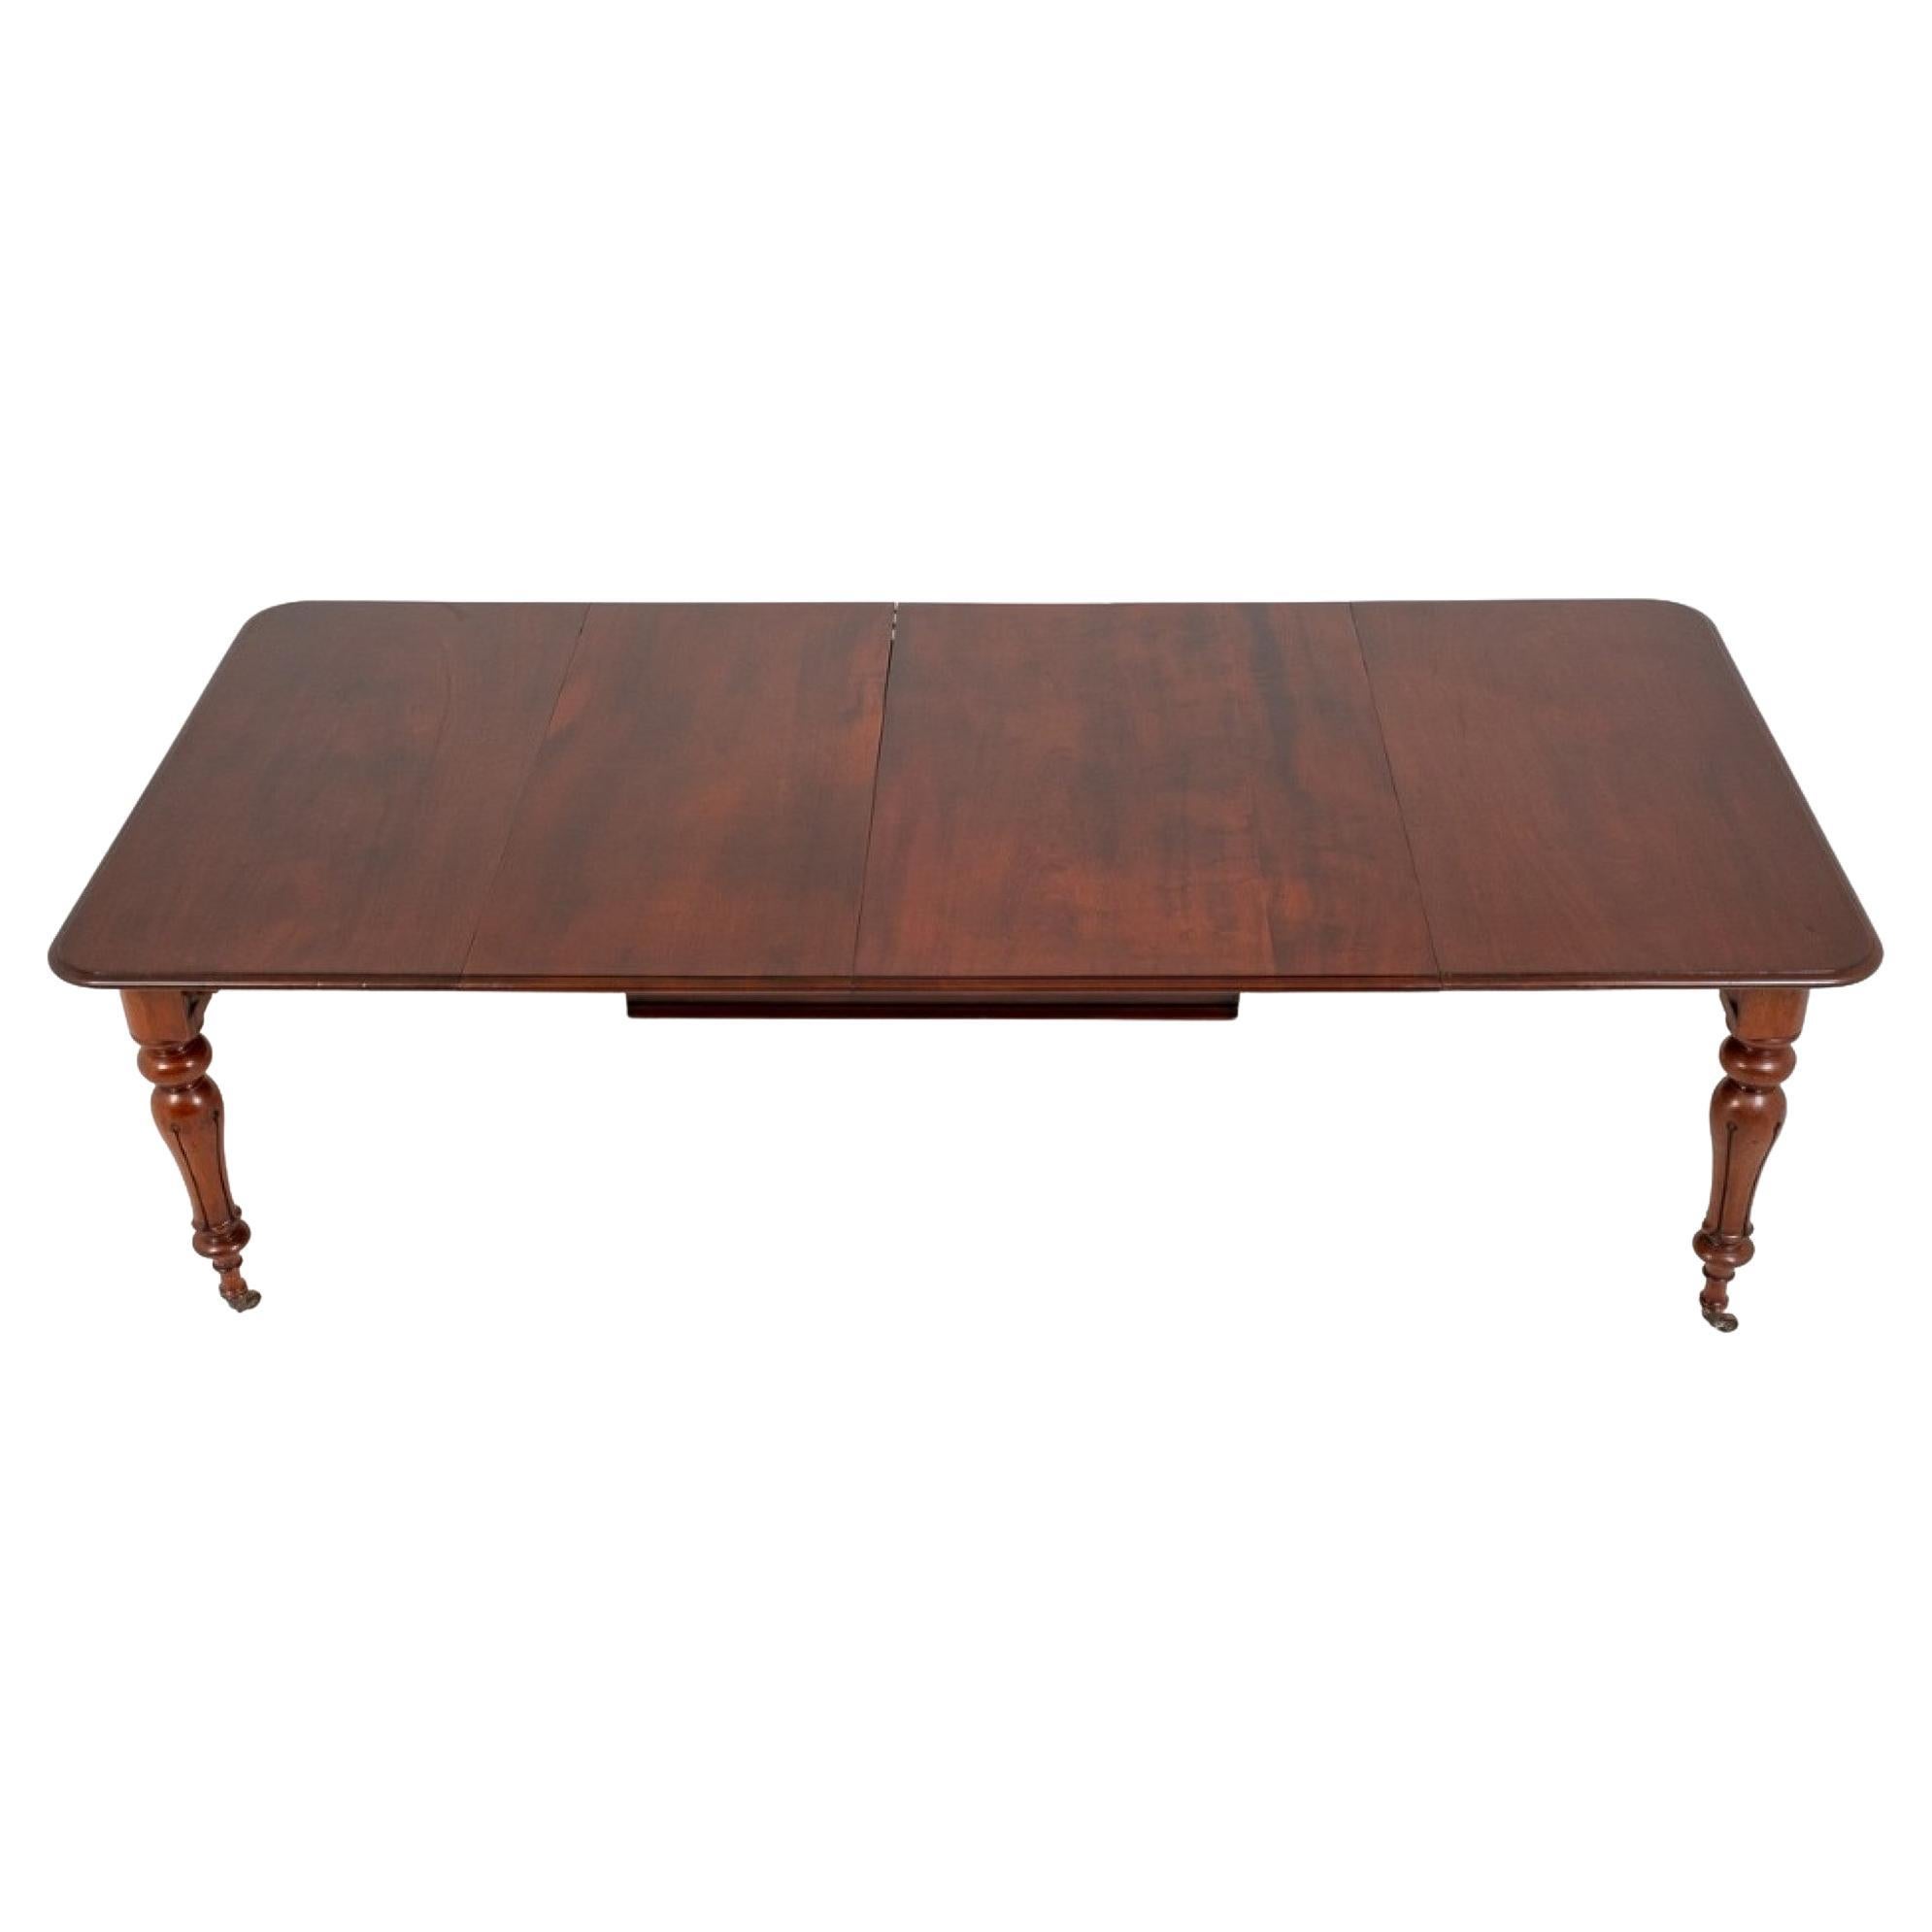 Extending Dining Table William IV Mahogany